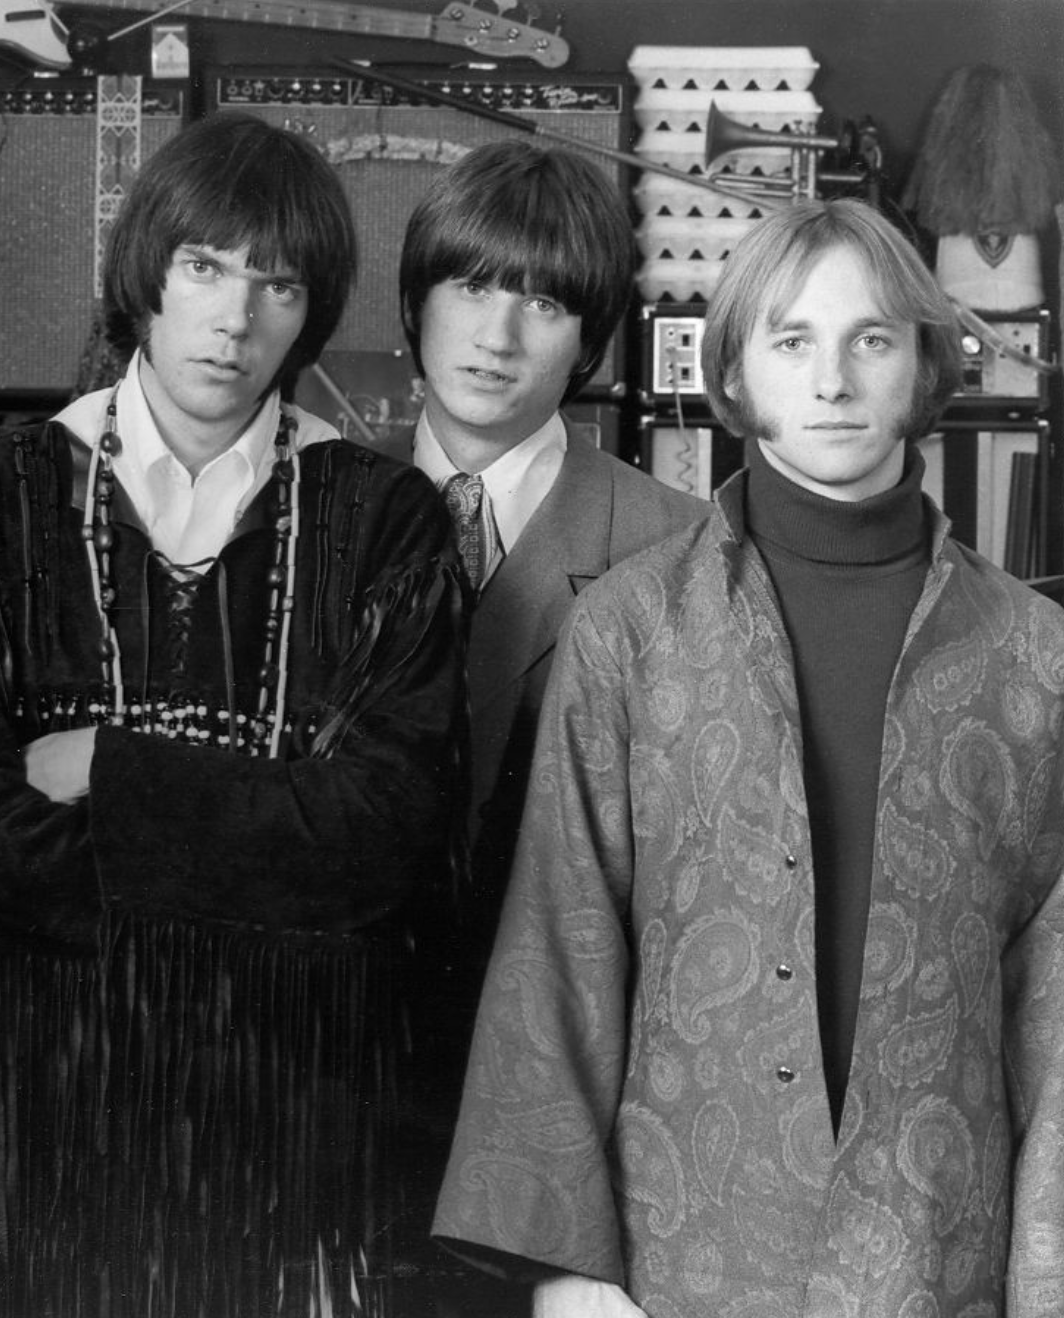 Cyberplads ophobe ansøge Buffalo Springfield Formed 55 Years Ago Today - Magnet Magazine